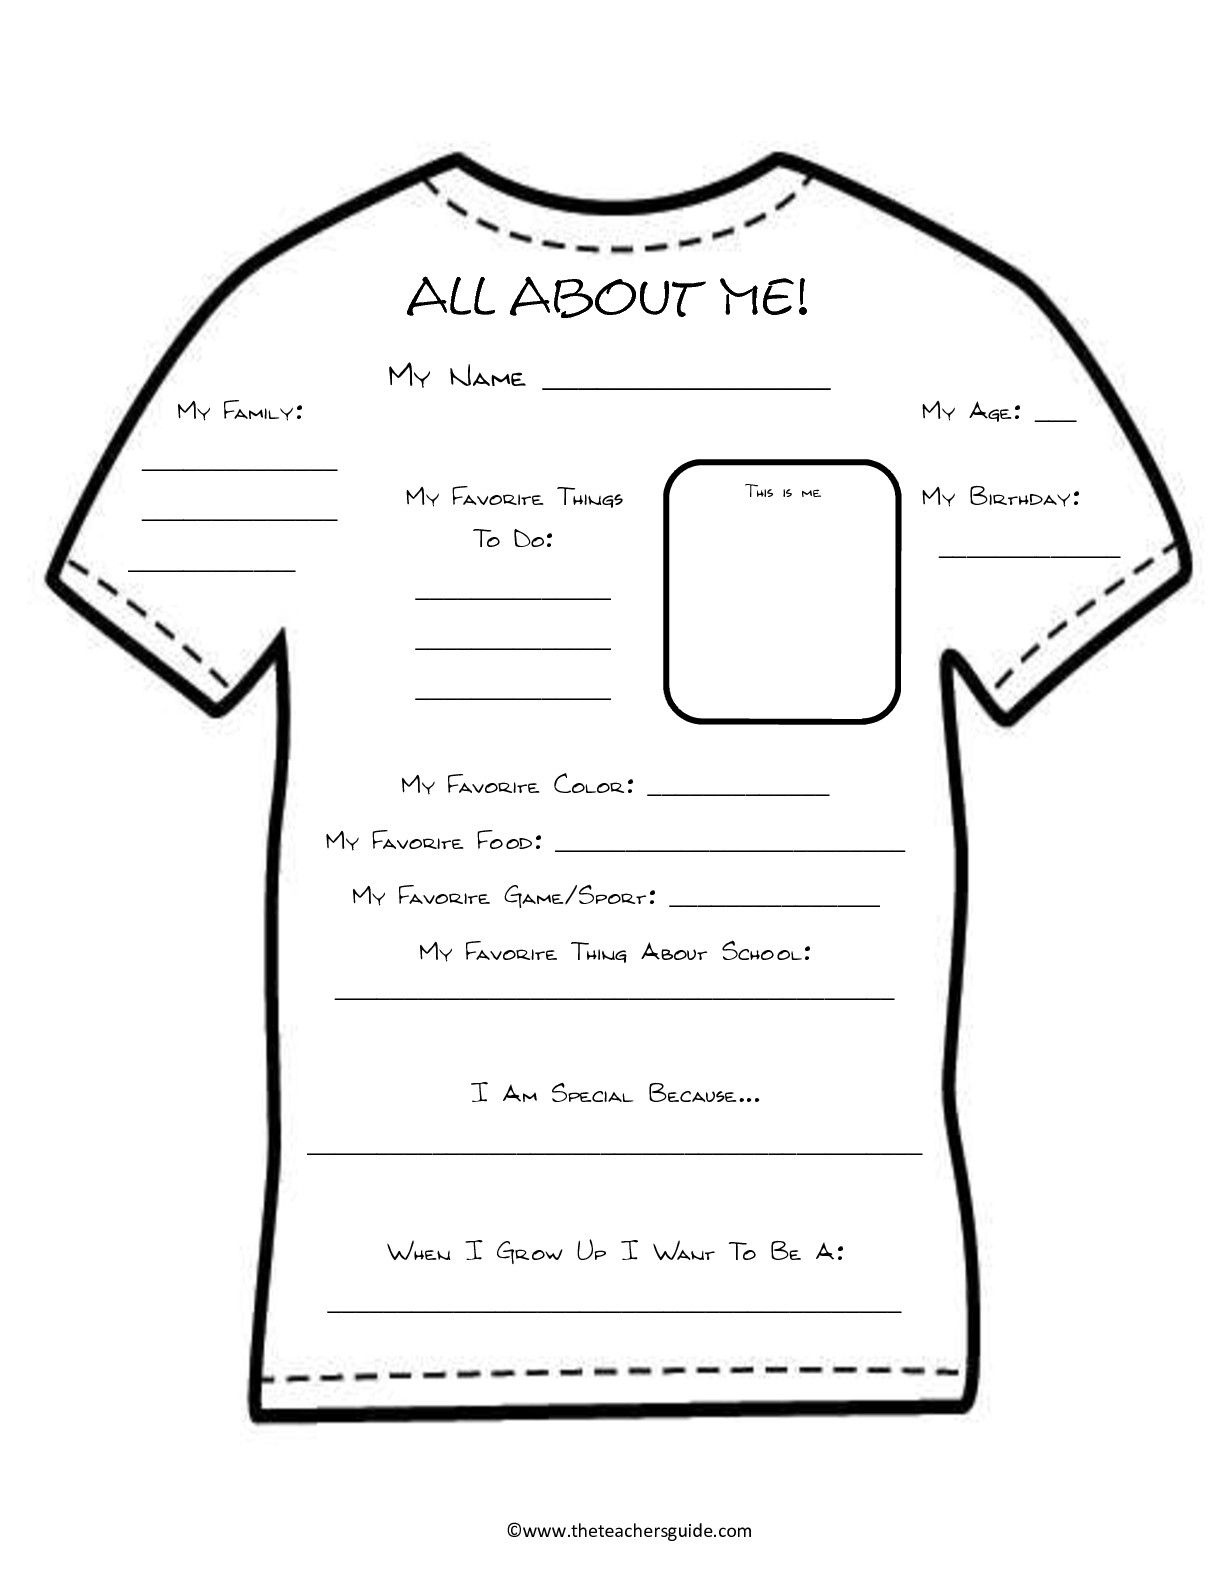 All About Me Template Worksheet | 1St Days Of School | All About Me - Free Printable All About Me Poster